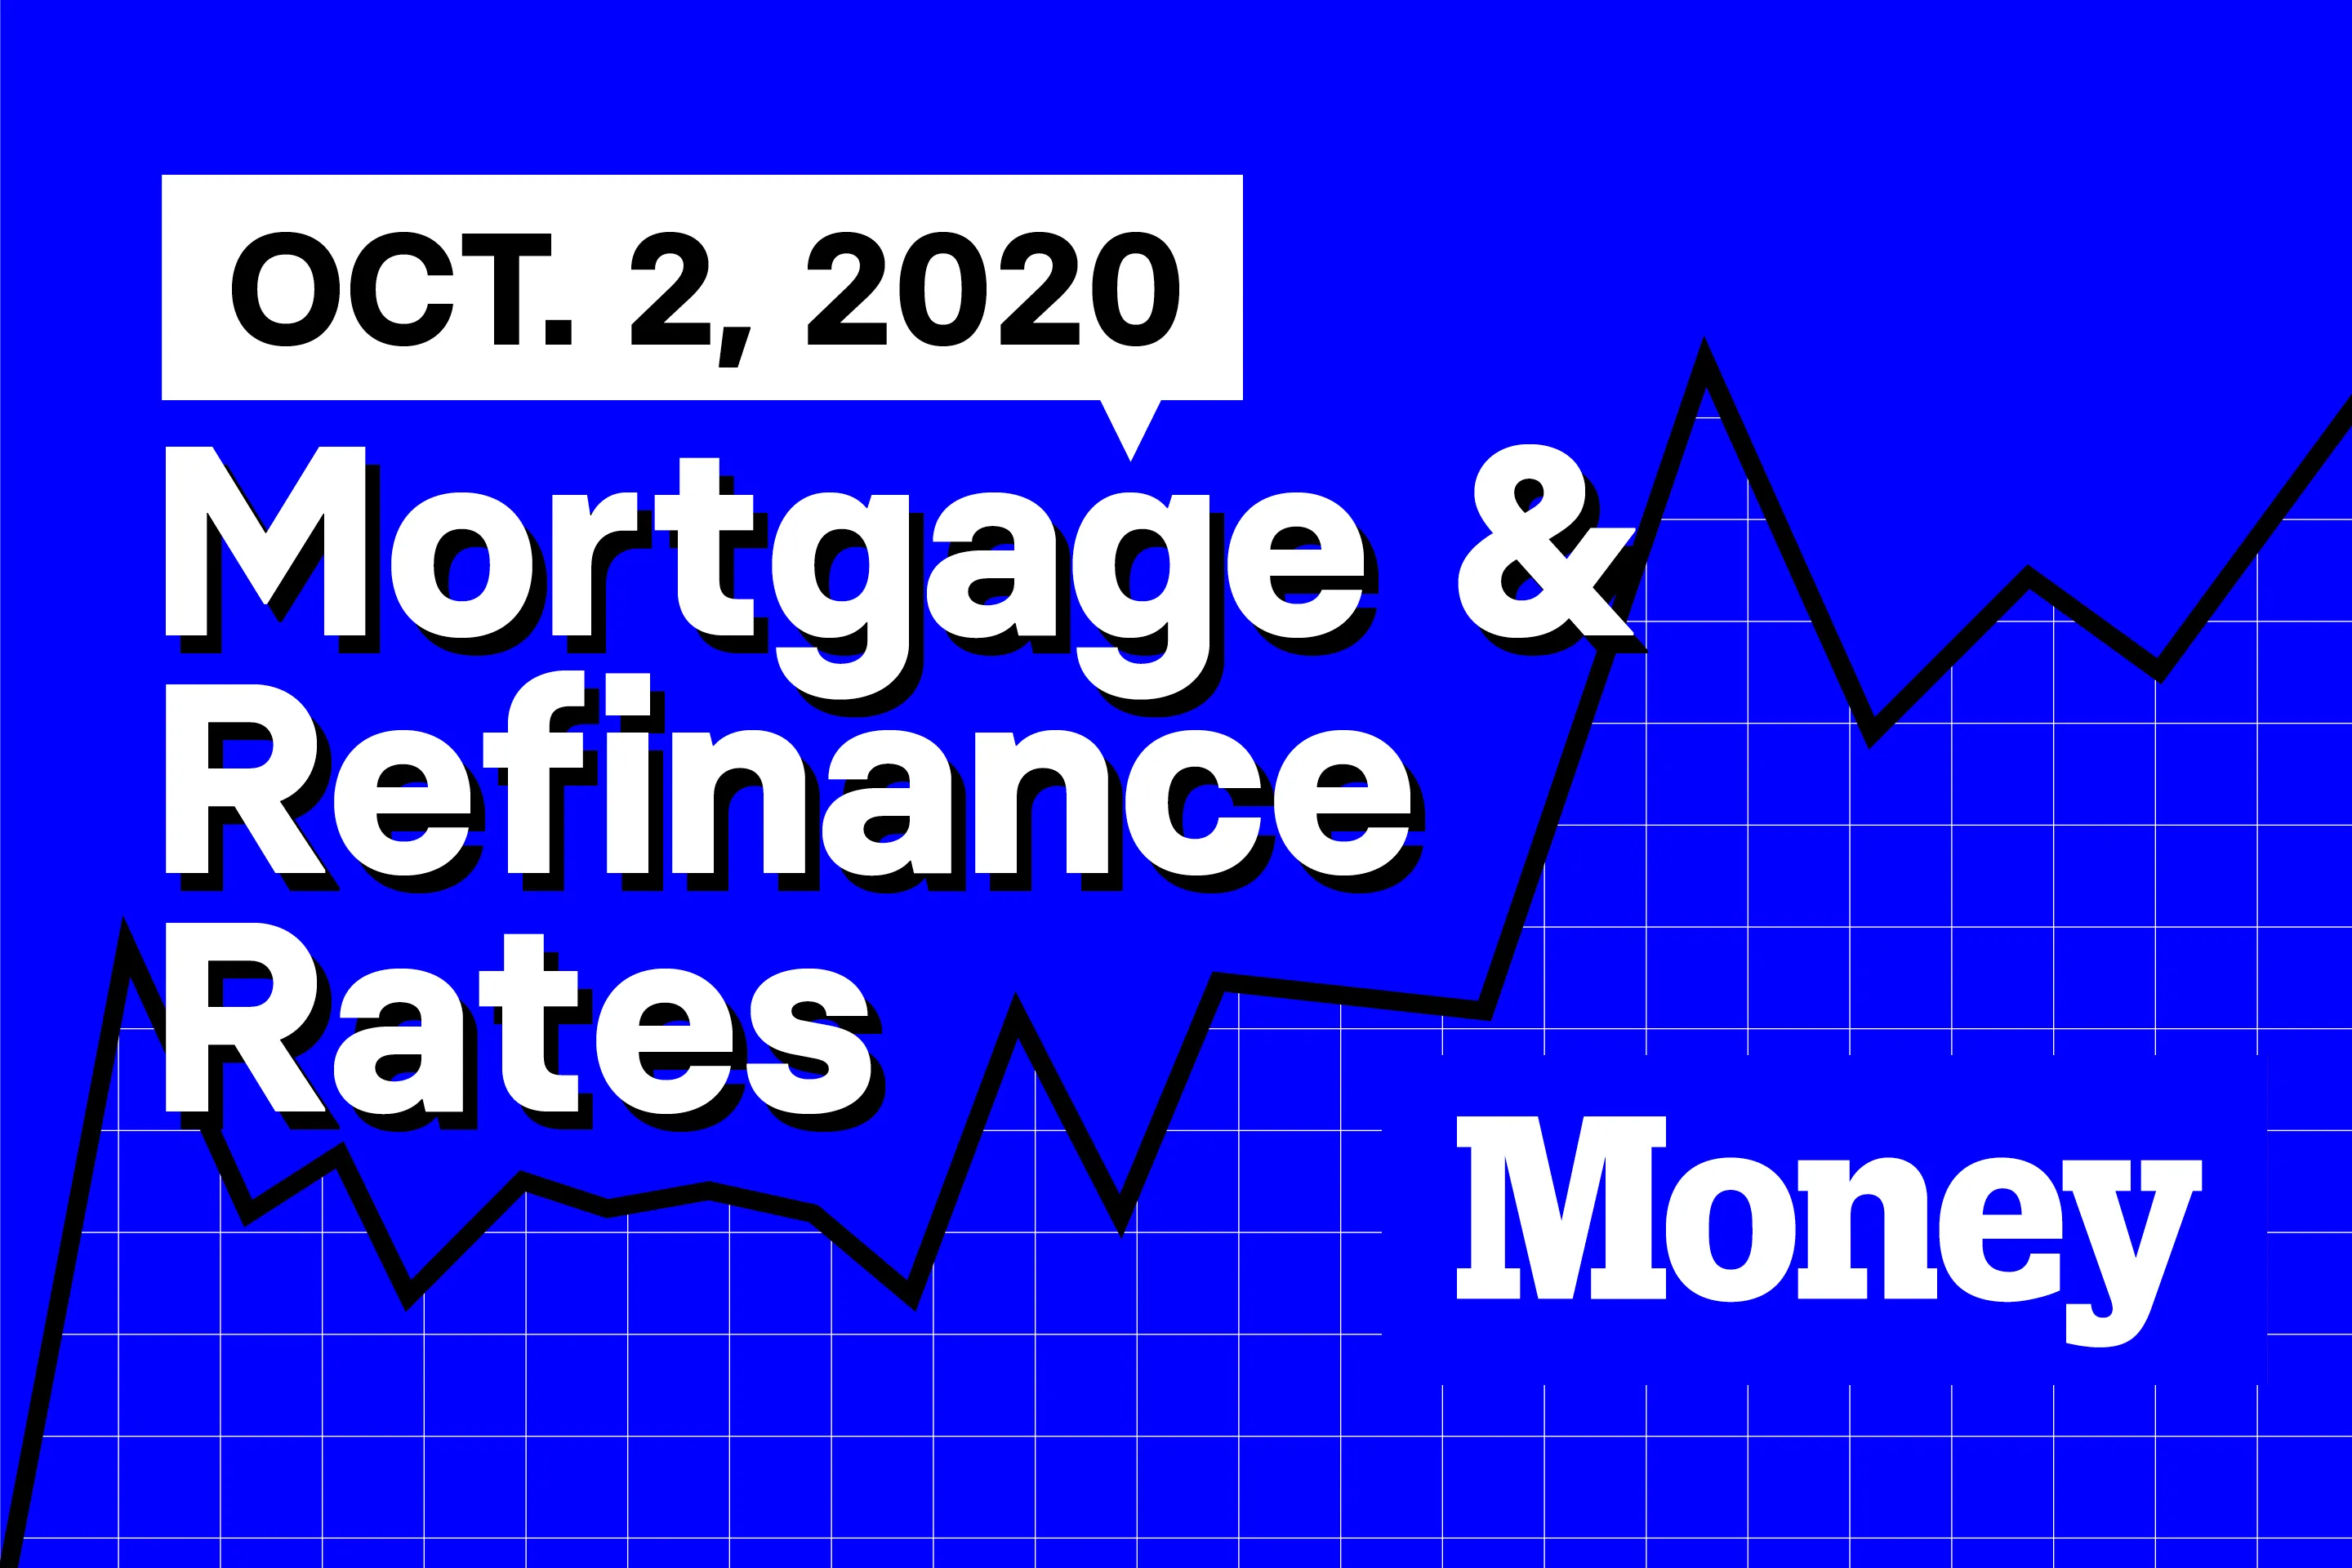 Here Are Today's Best Mortgage & Refinance Rates for October 2, 2020